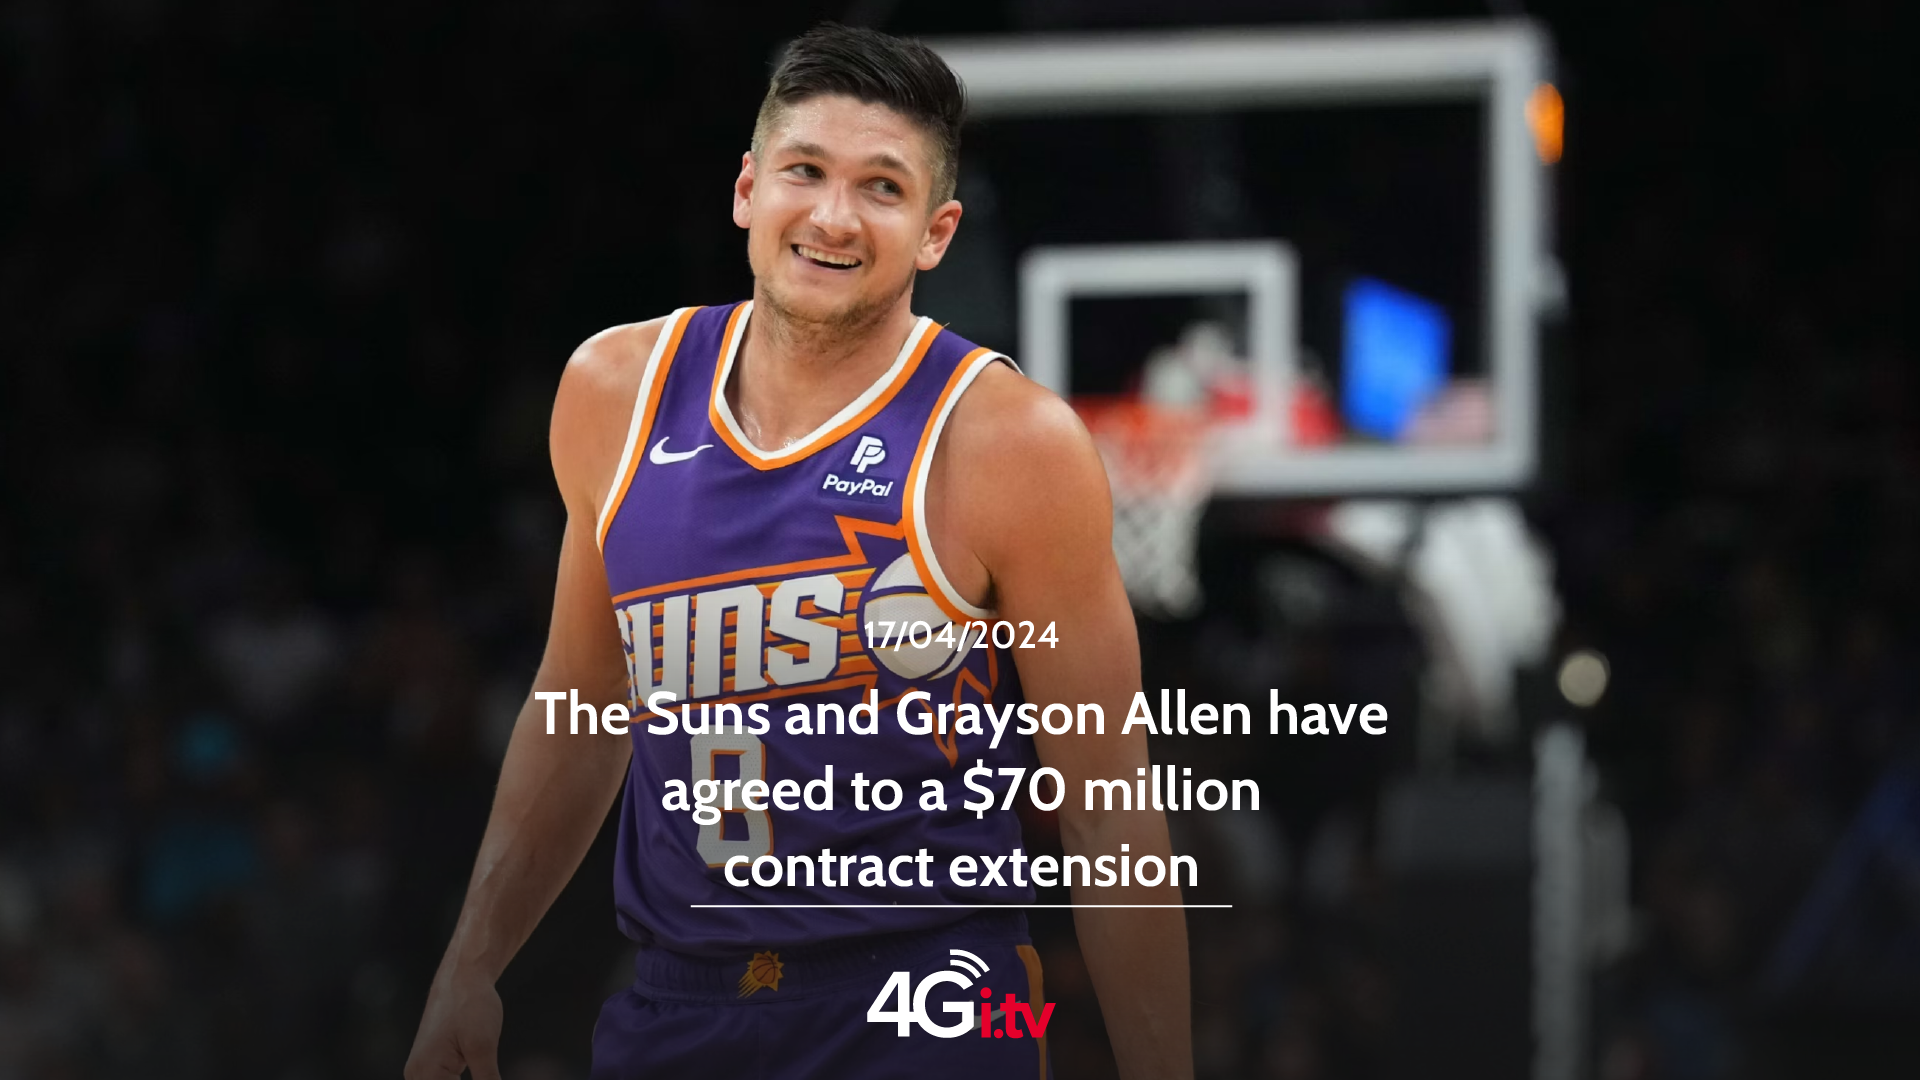 Lesen Sie mehr über den Artikel The Suns and Grayson Allen have agreed to a $70 million contract extension